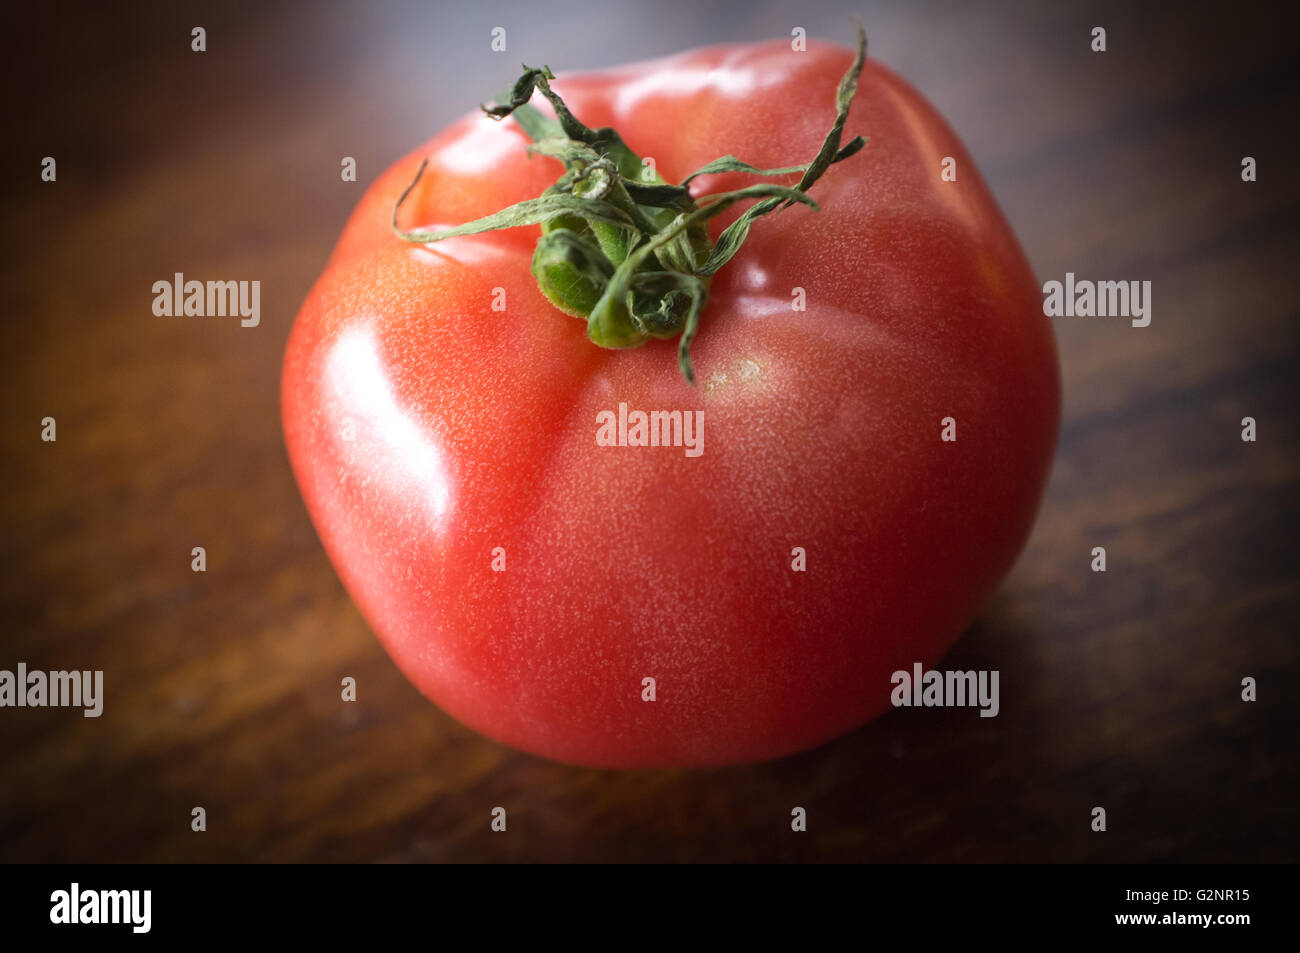 Colorful juicy heirloom or heritage tomatoes on wooden table Stock Photo